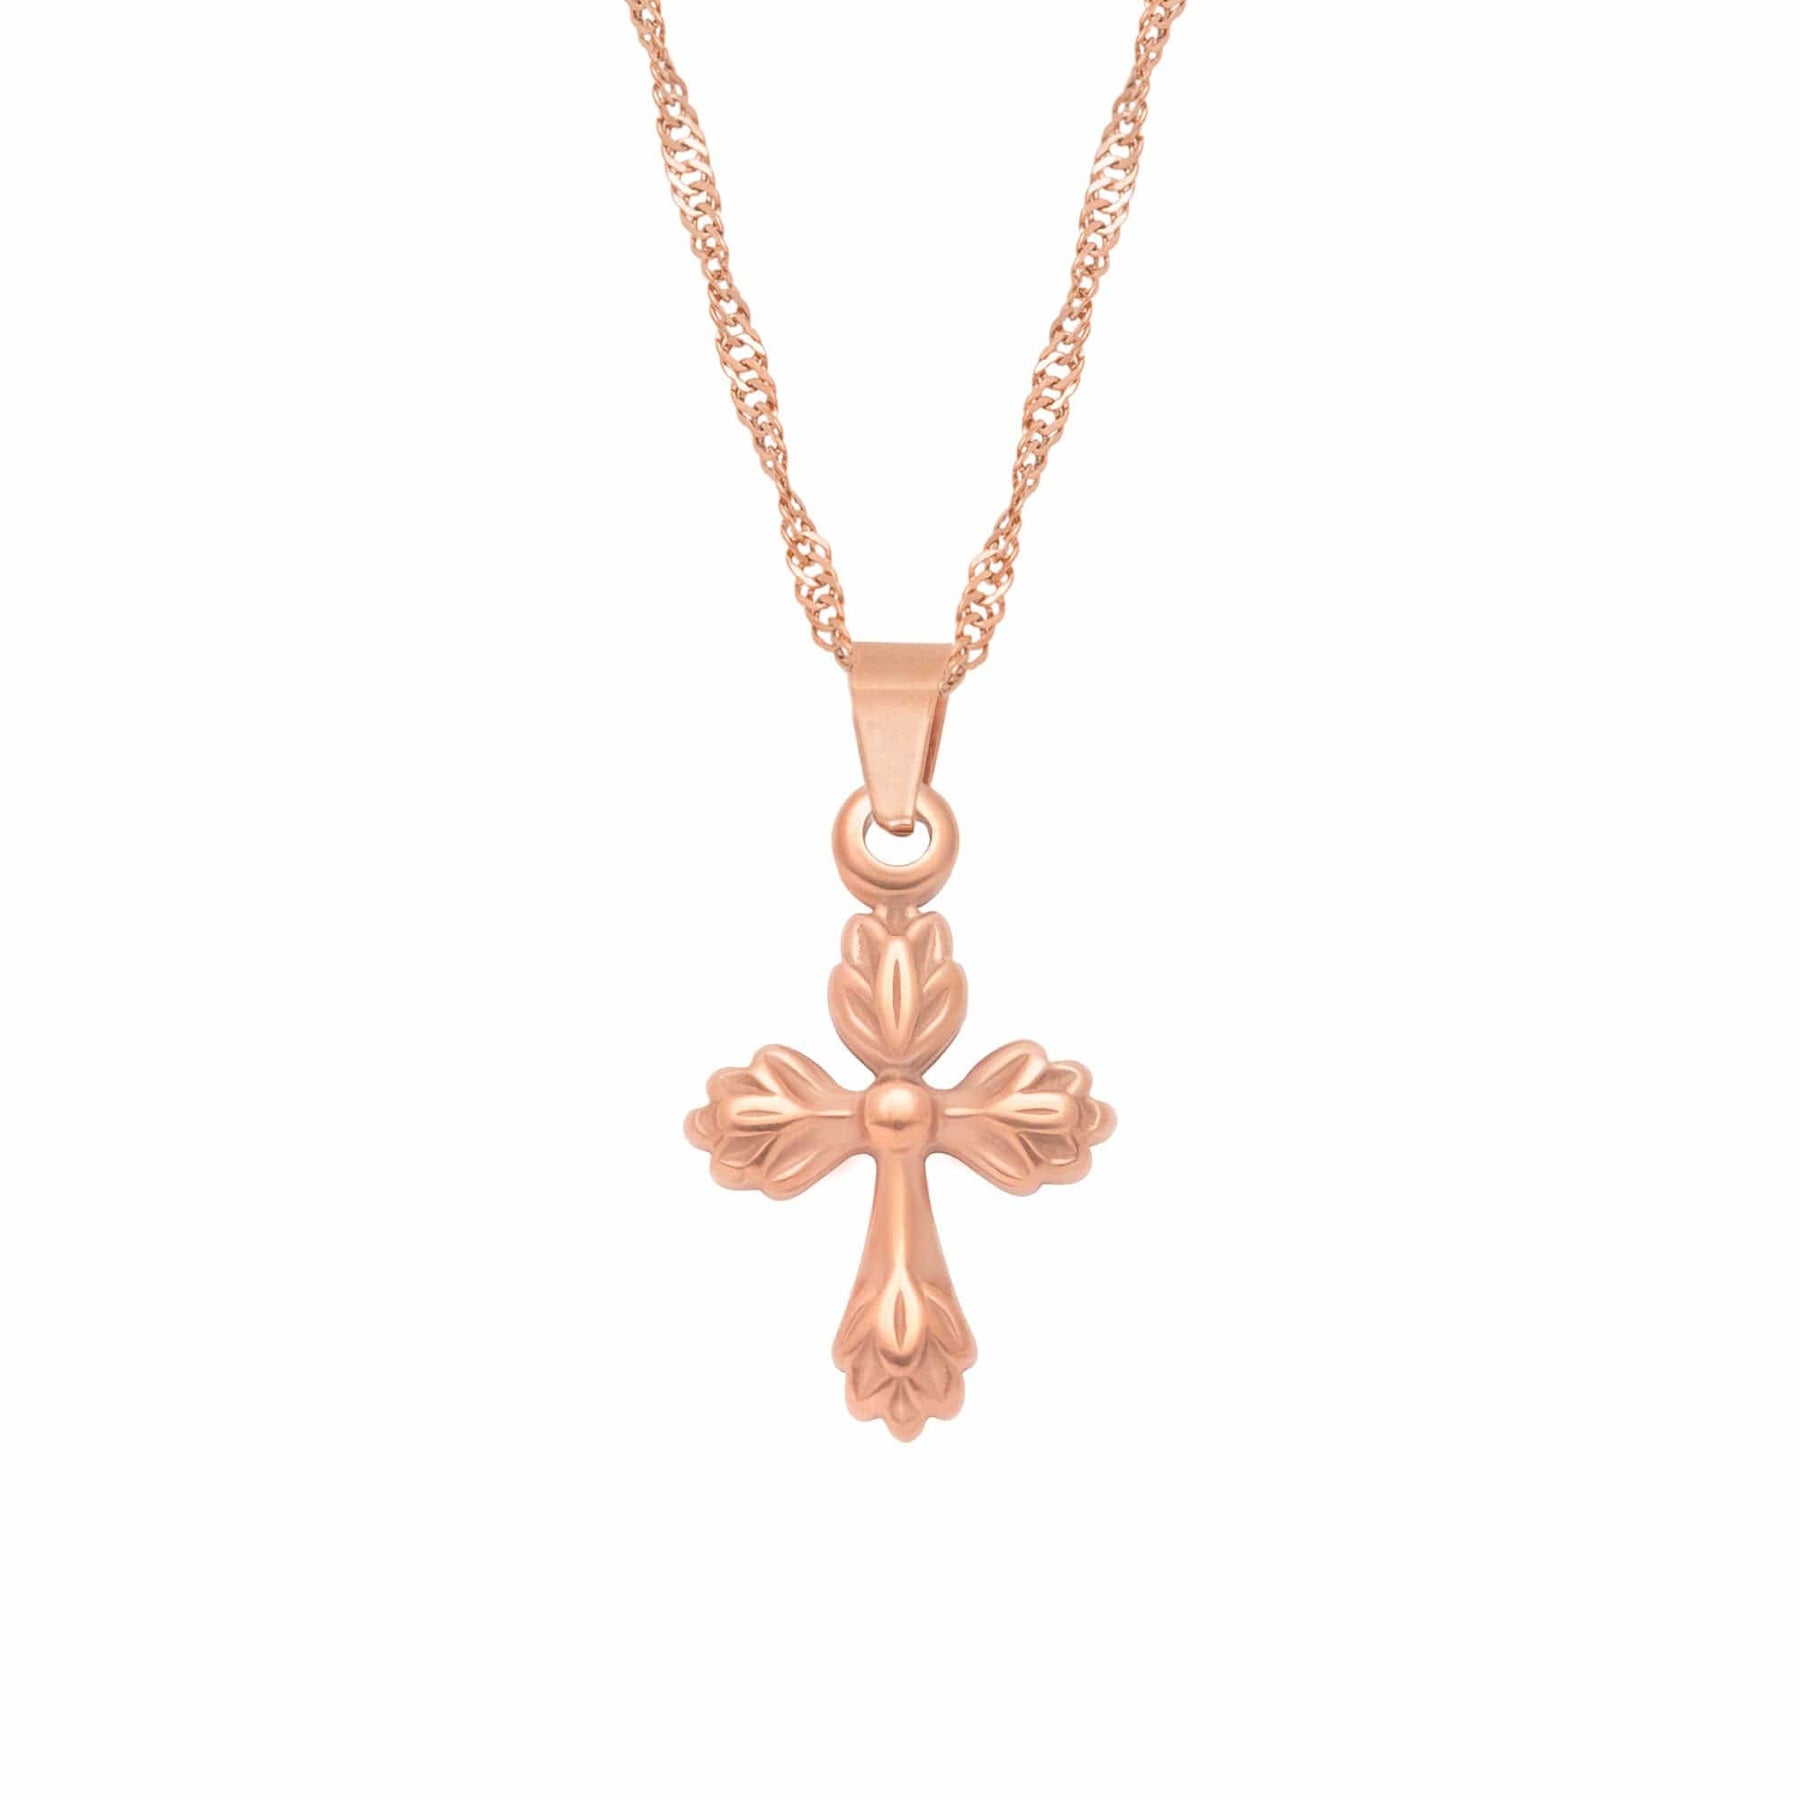 BohoMoon Stainless Steel Serenity Cross Necklace Rose Gold